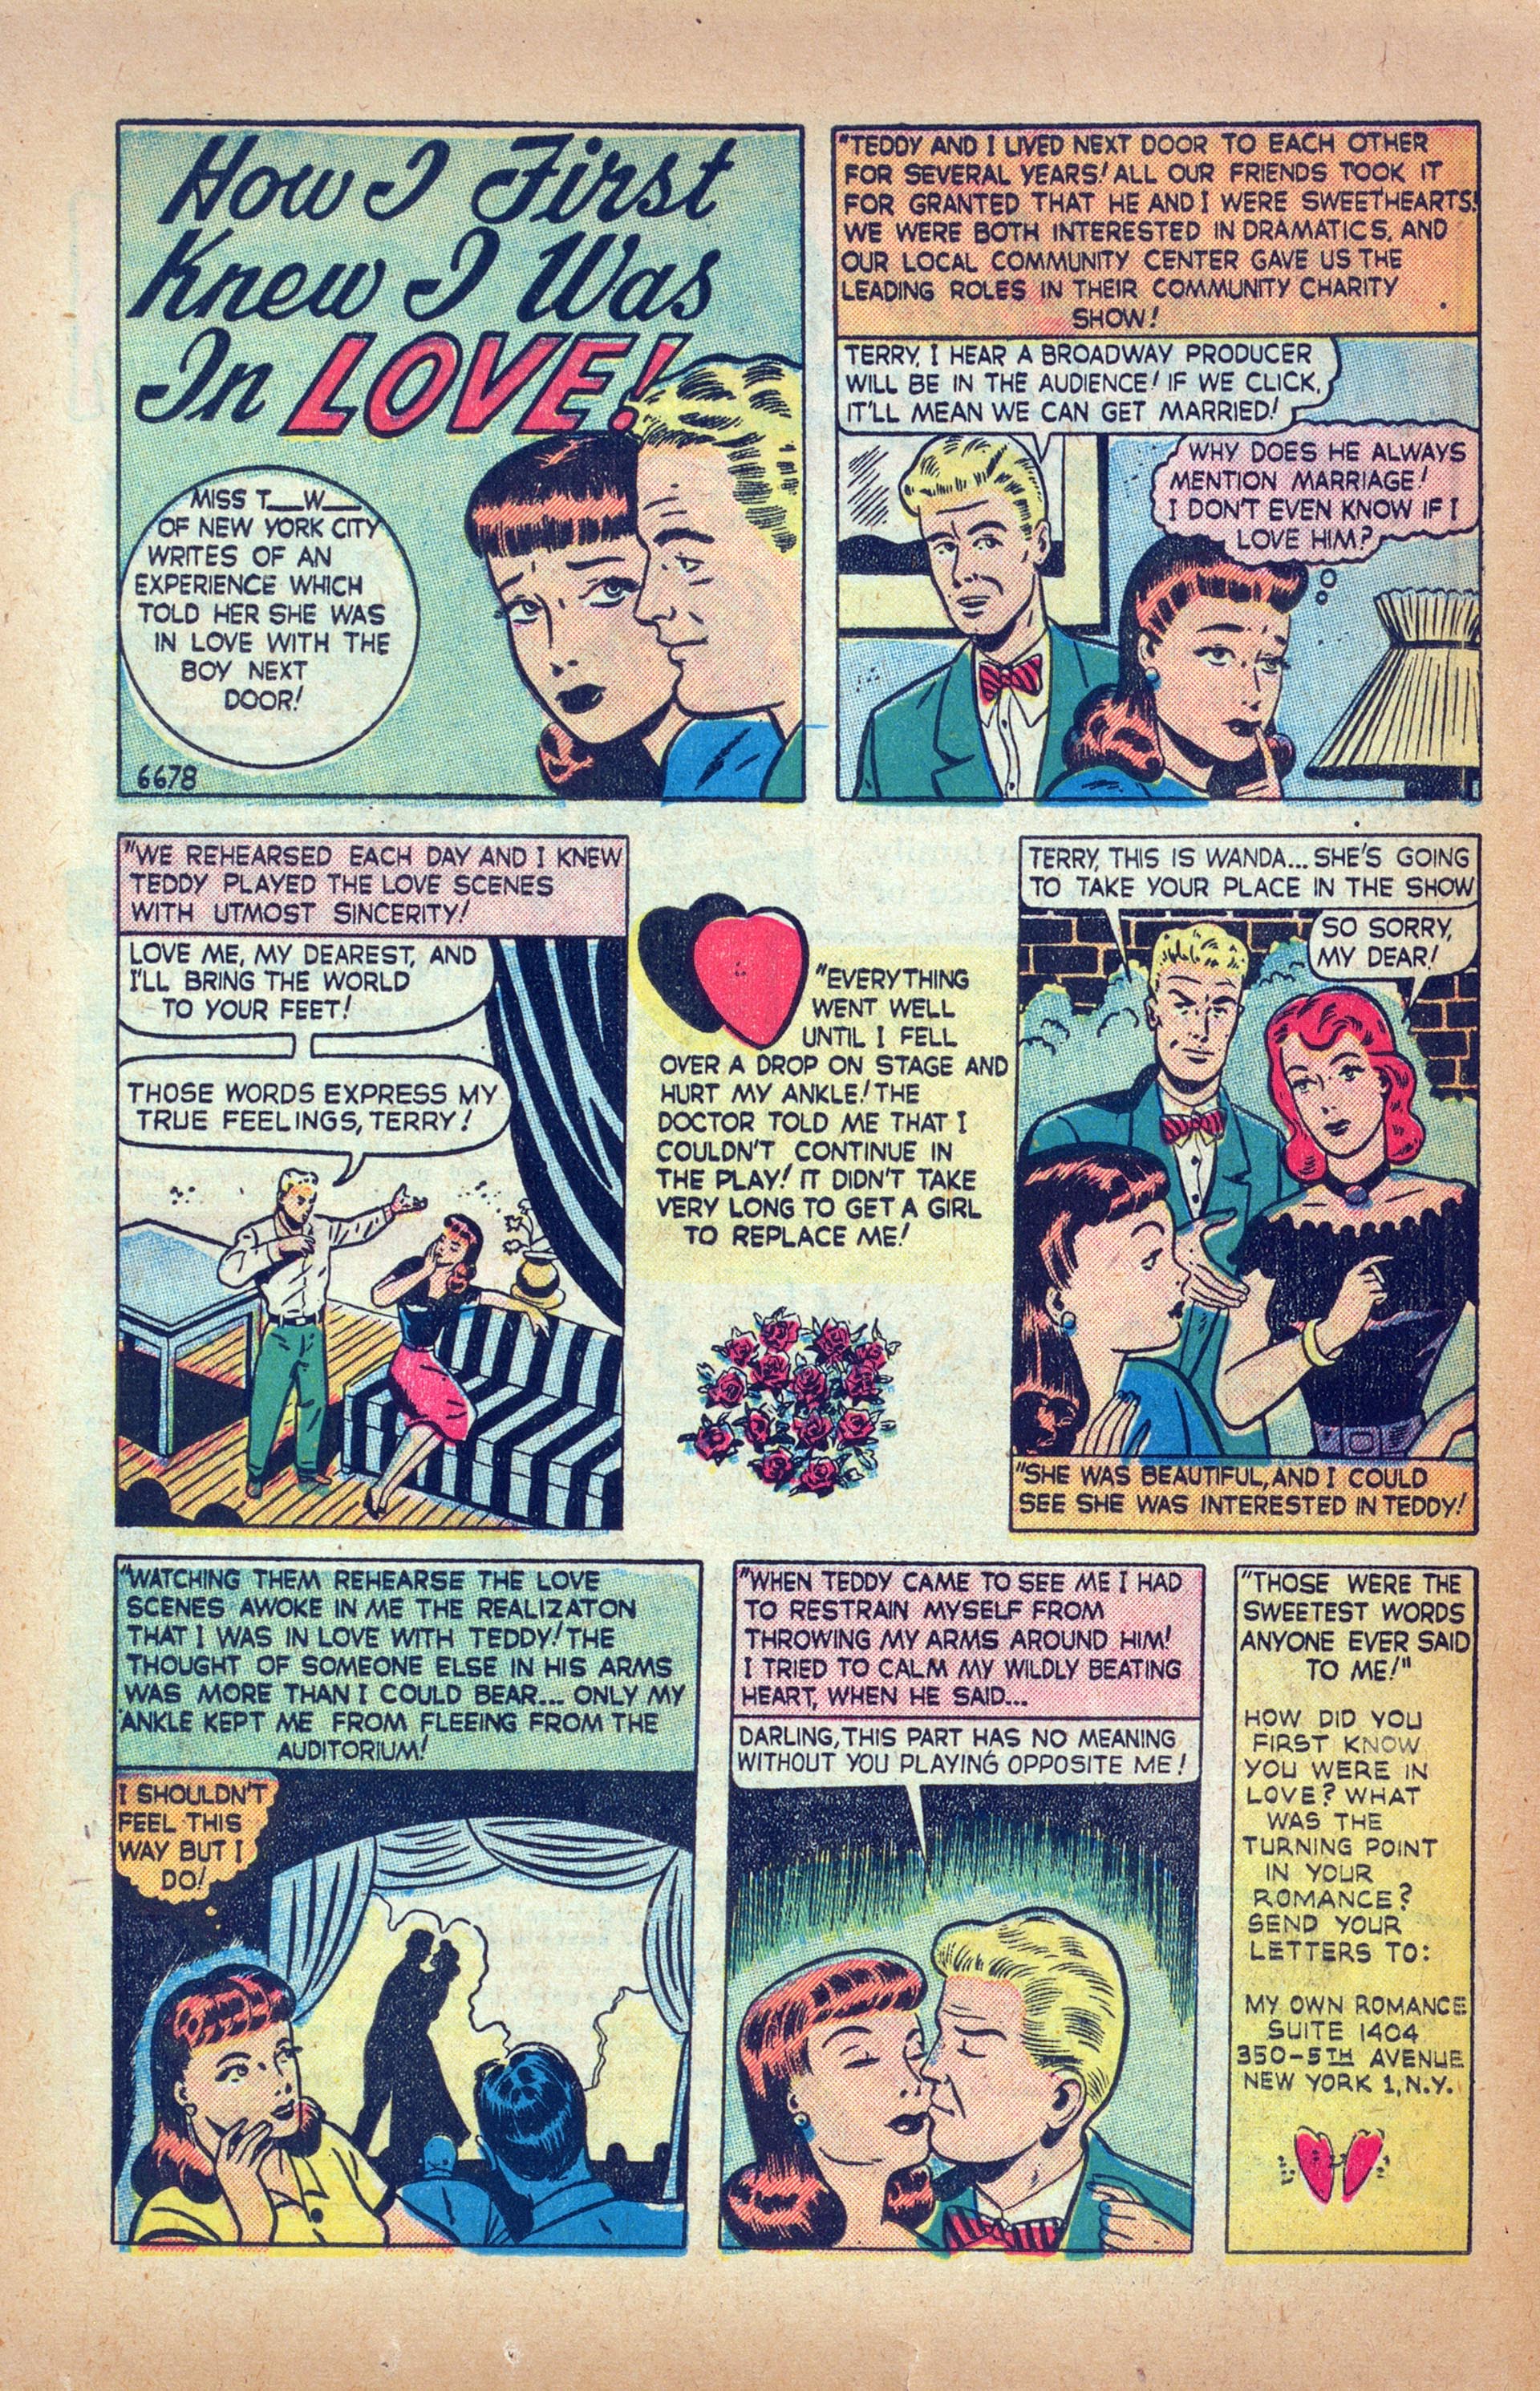 Read online My Own Romance comic -  Issue #12 - 38